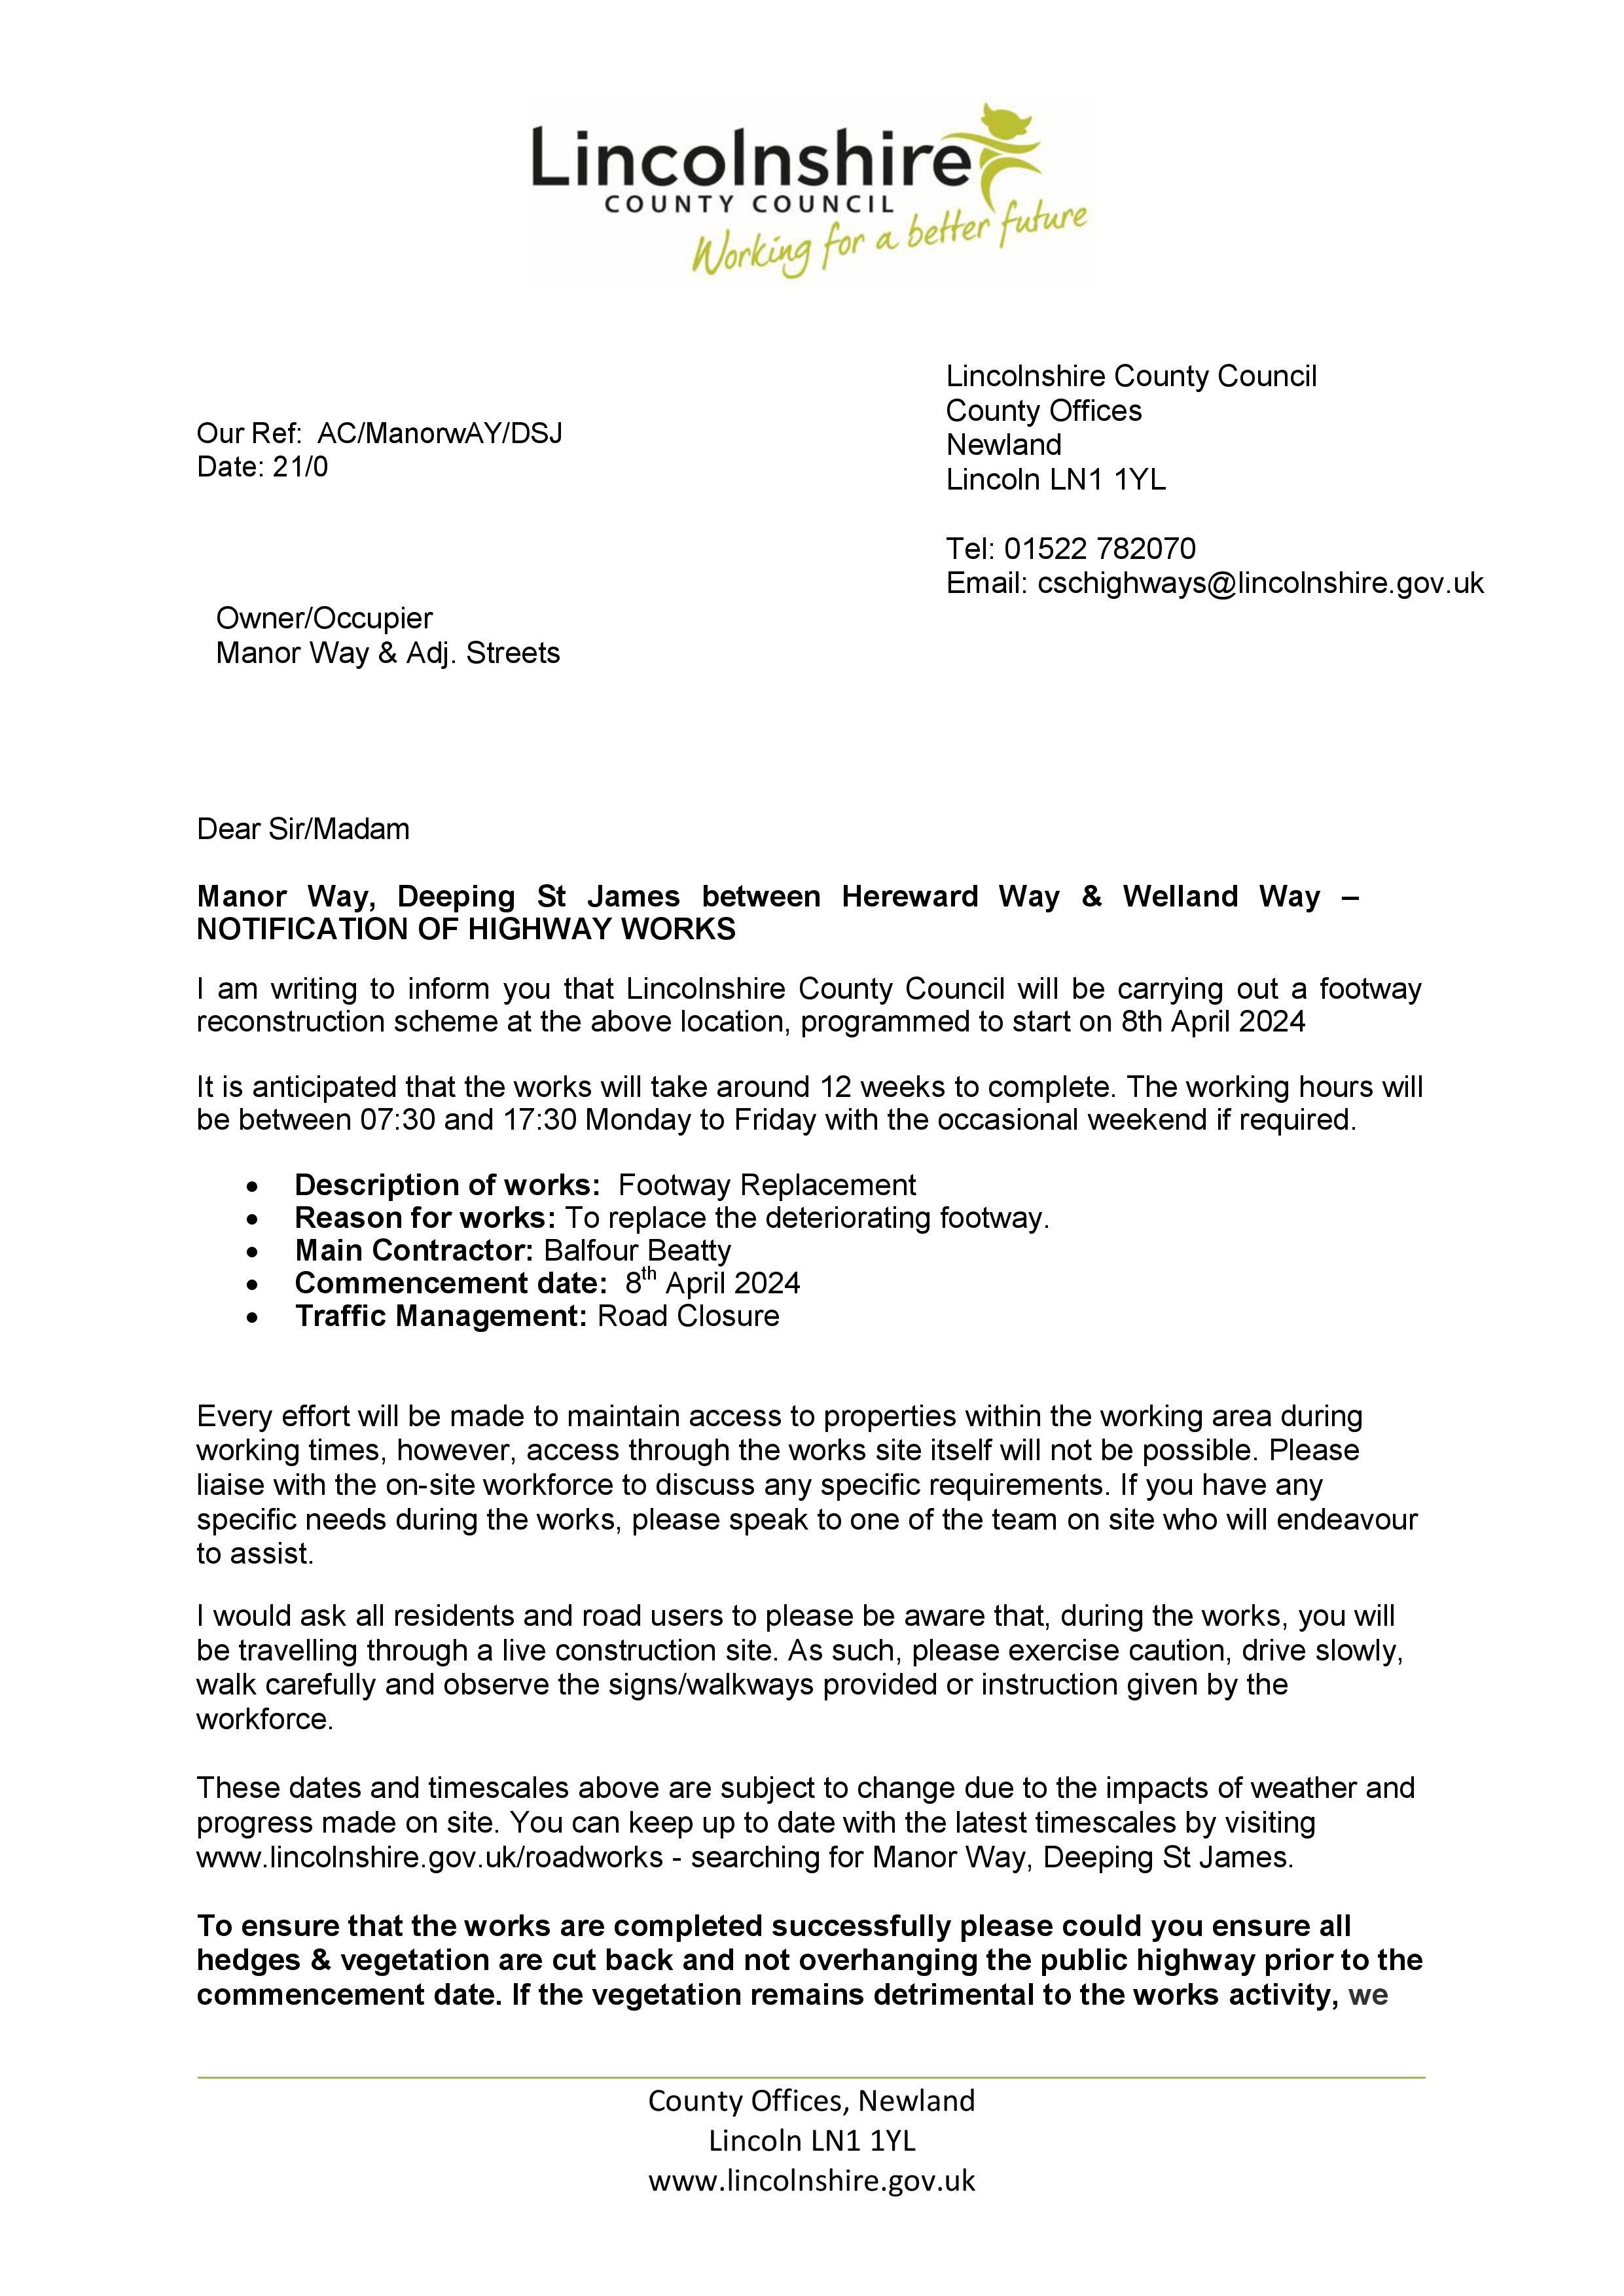 Lcc resident letter manor way deeping st james for work to commence from 8 april 24 1